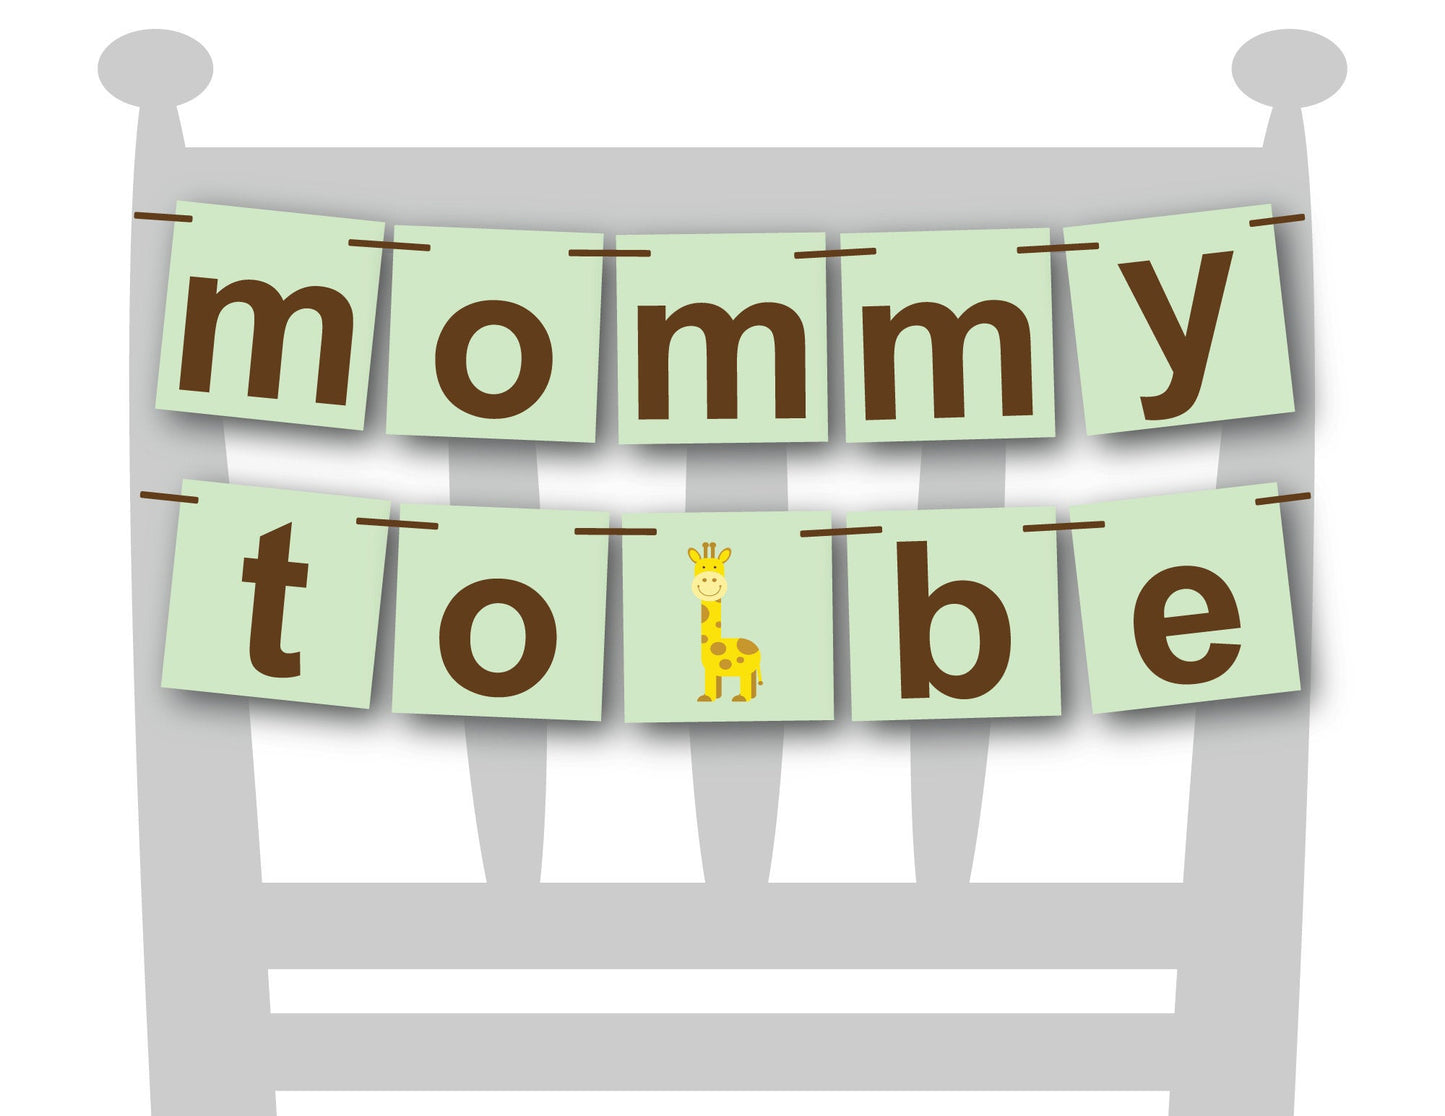 DIY momma to be  giraffe baby shower decorations - Celebrating Together